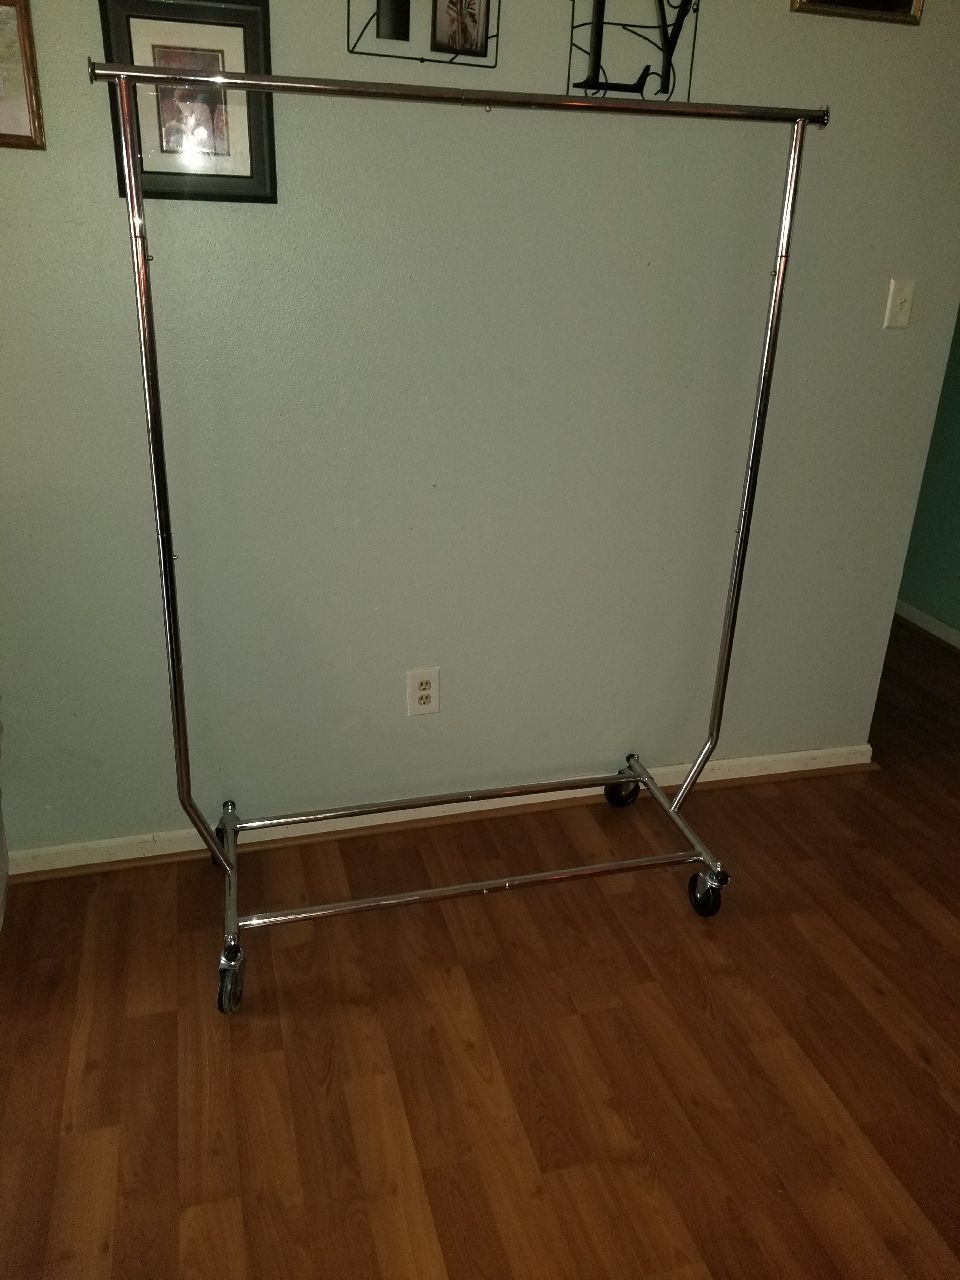 Solid metal rack holds up to 250 pounds